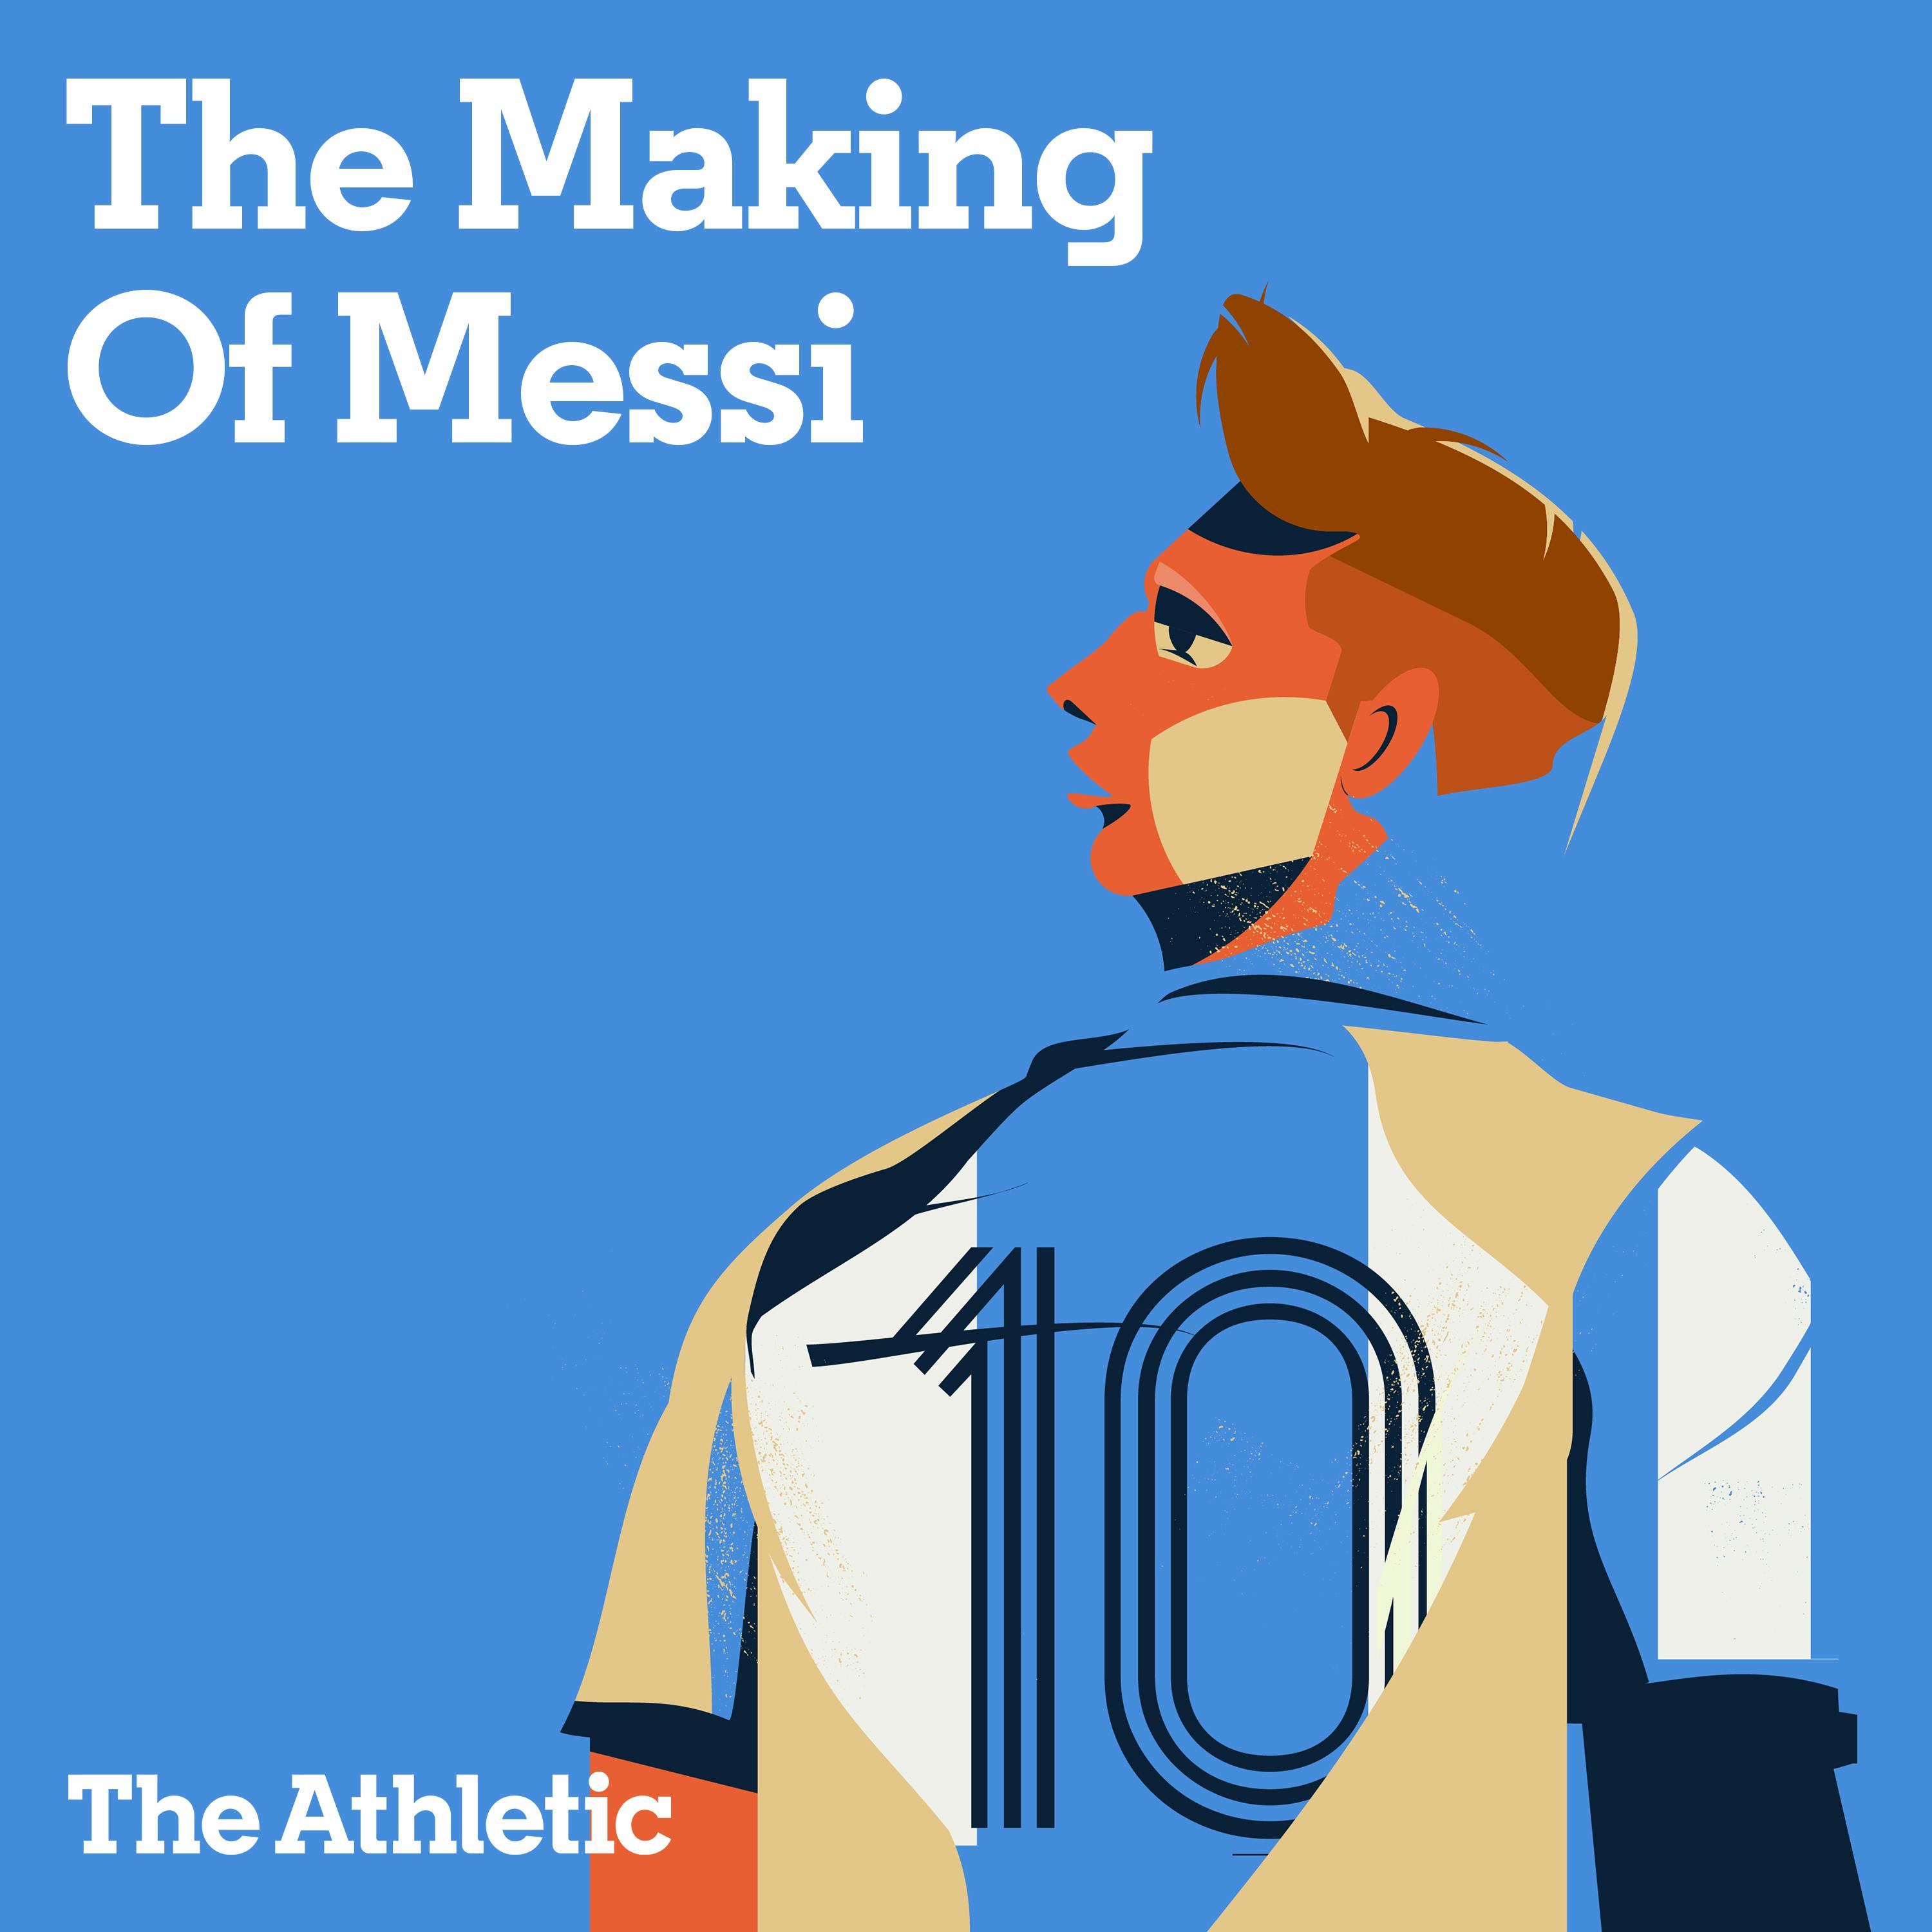 The Making of Messi: Leaving a Legacy